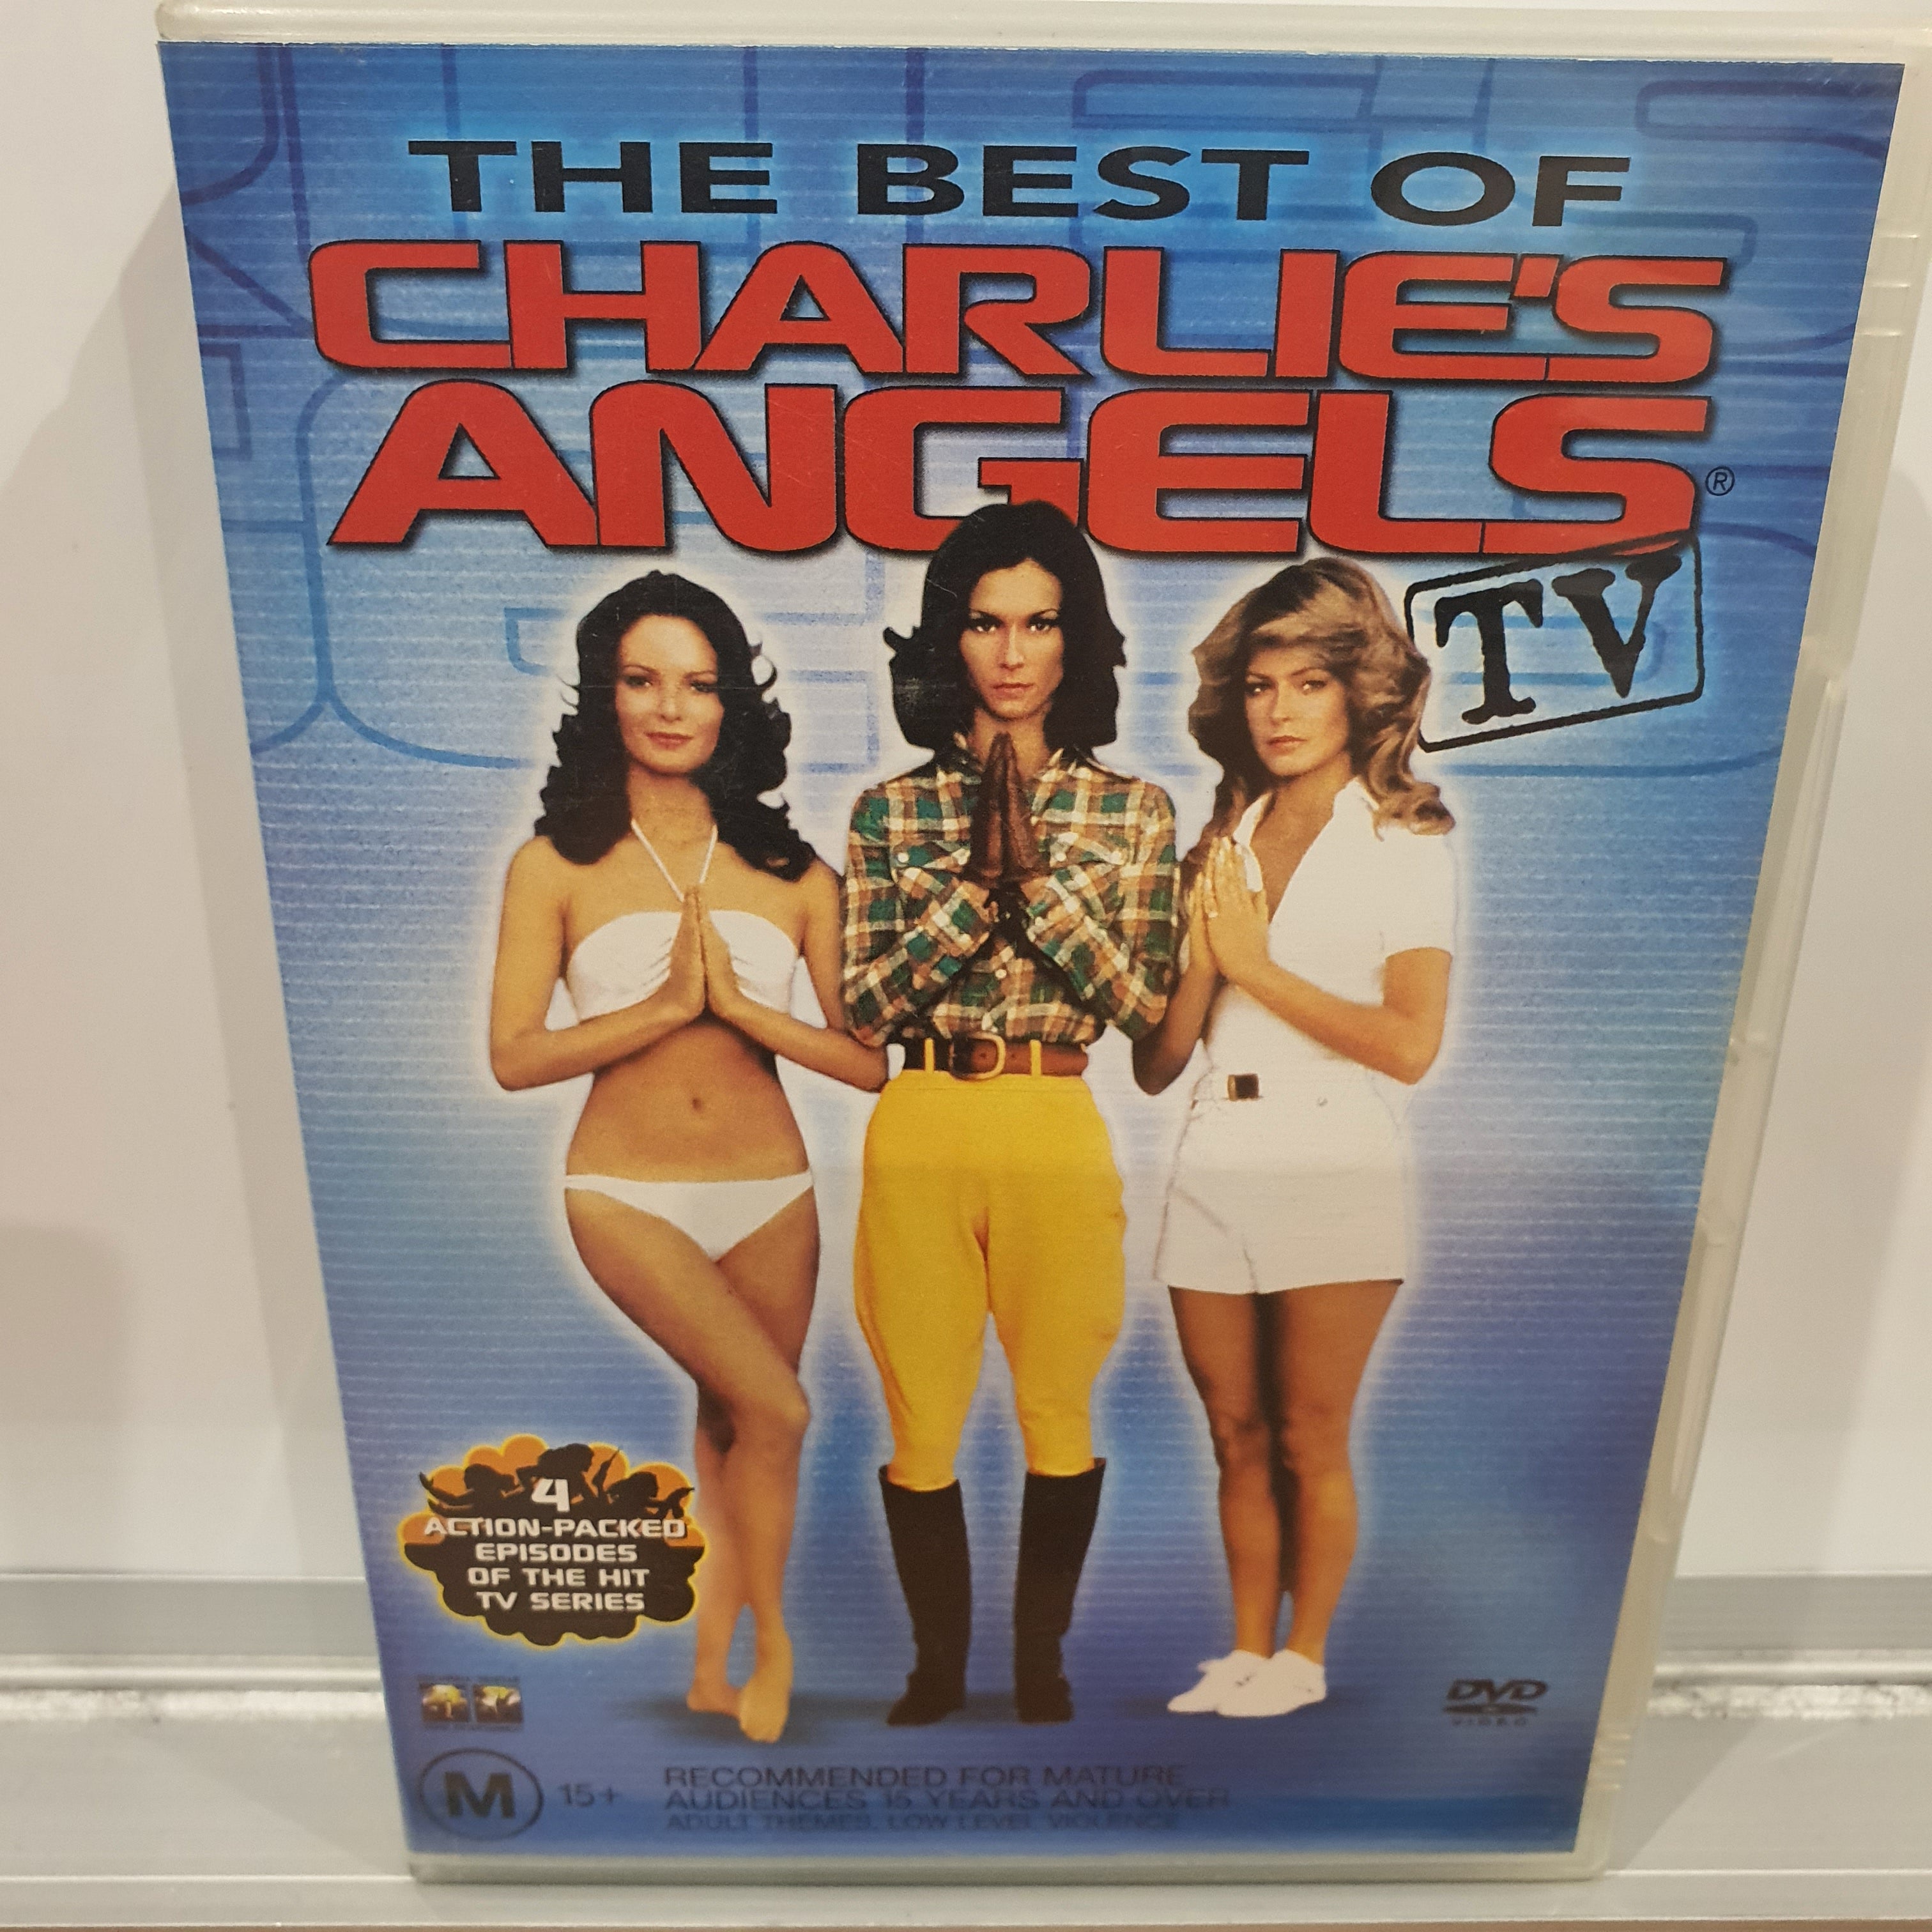 THE BEST OF CHARLIES ANGELS TV SHOW